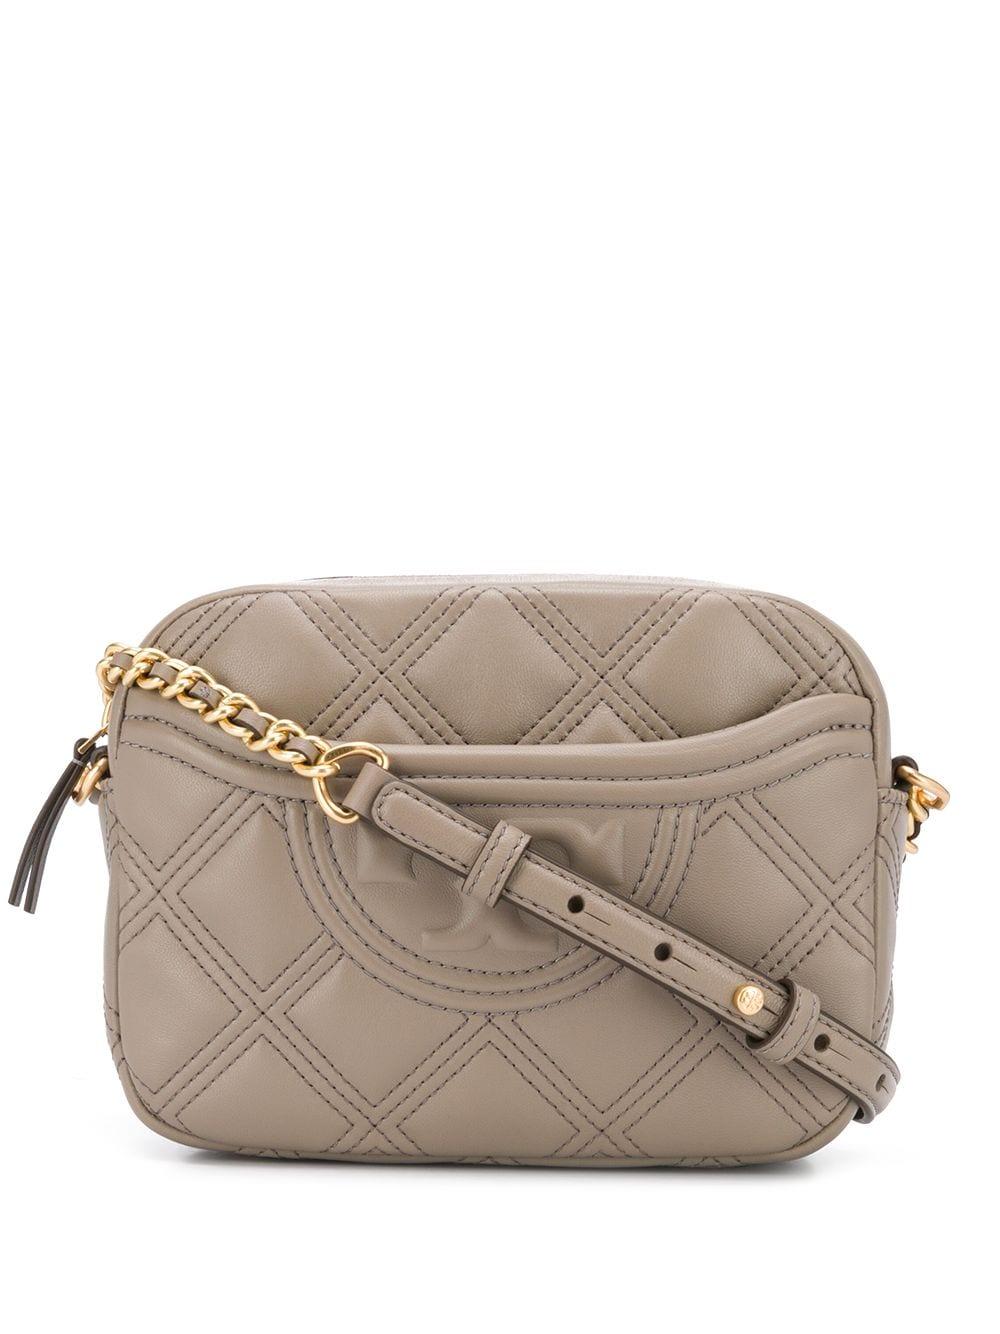 Tory Burch Leather Fleming Soft Camera Bag in Grey (Gray) - Lyst